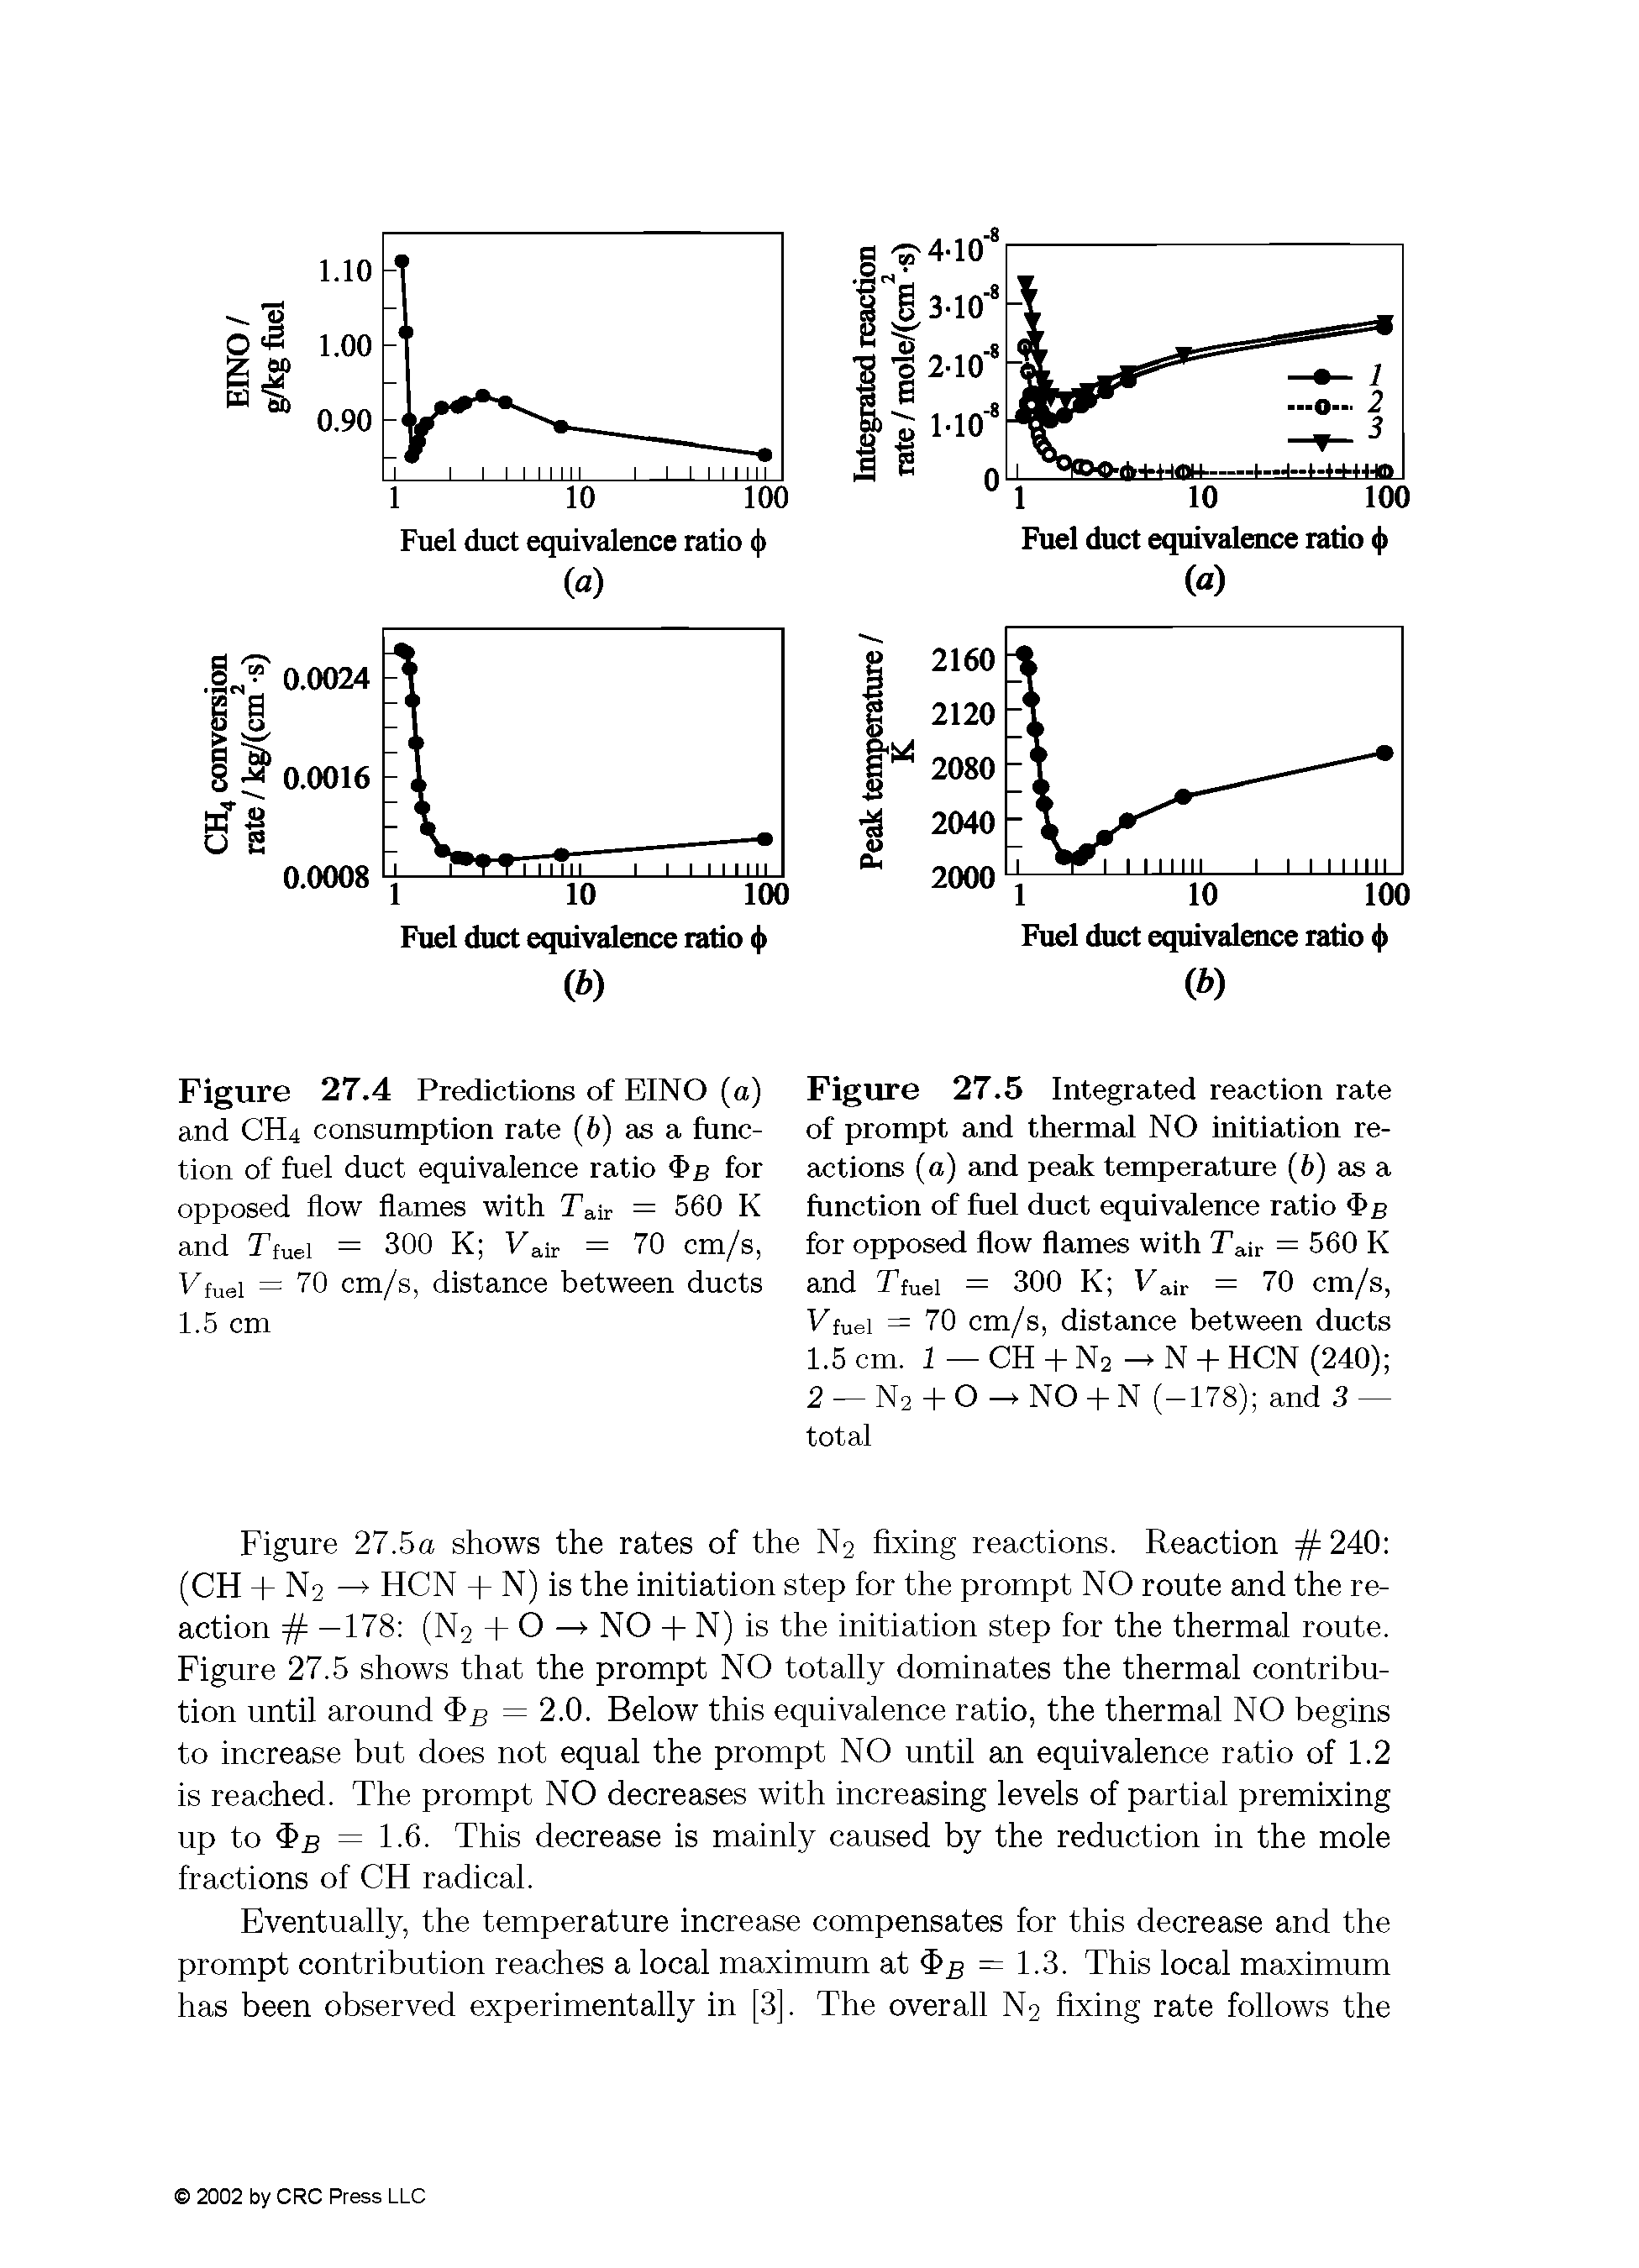 Figure 27.5 Integrated reaction rate of prompt and thermal NO initiation reactions (a) and peak temperature (6) as a function of fuel duct equivalence ratio 4>b for opposed flow flames with Tair = 560 K and Ttuei = 300 K Fair = 70 cm/s, Ftuei = 70 cm/s, distance between ducts 1.5 cm. 1 — CH -h N2 N -h HCN (240) 2 N2- -0-S N0- -N (-178) and 3 — total...